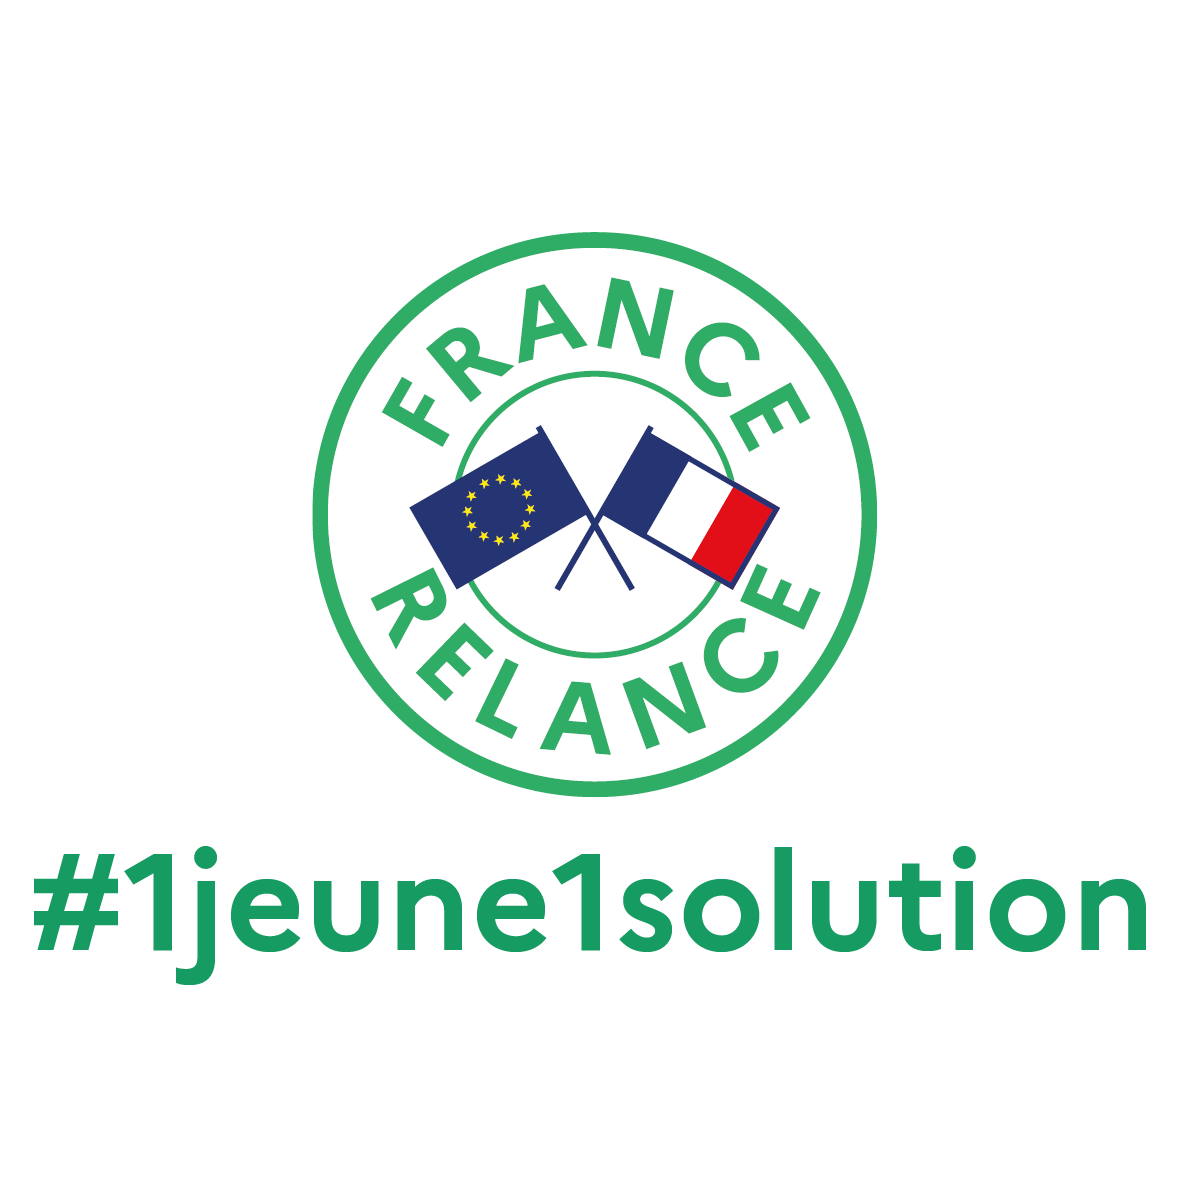 1 jeunes 1 solutions Synergie Family